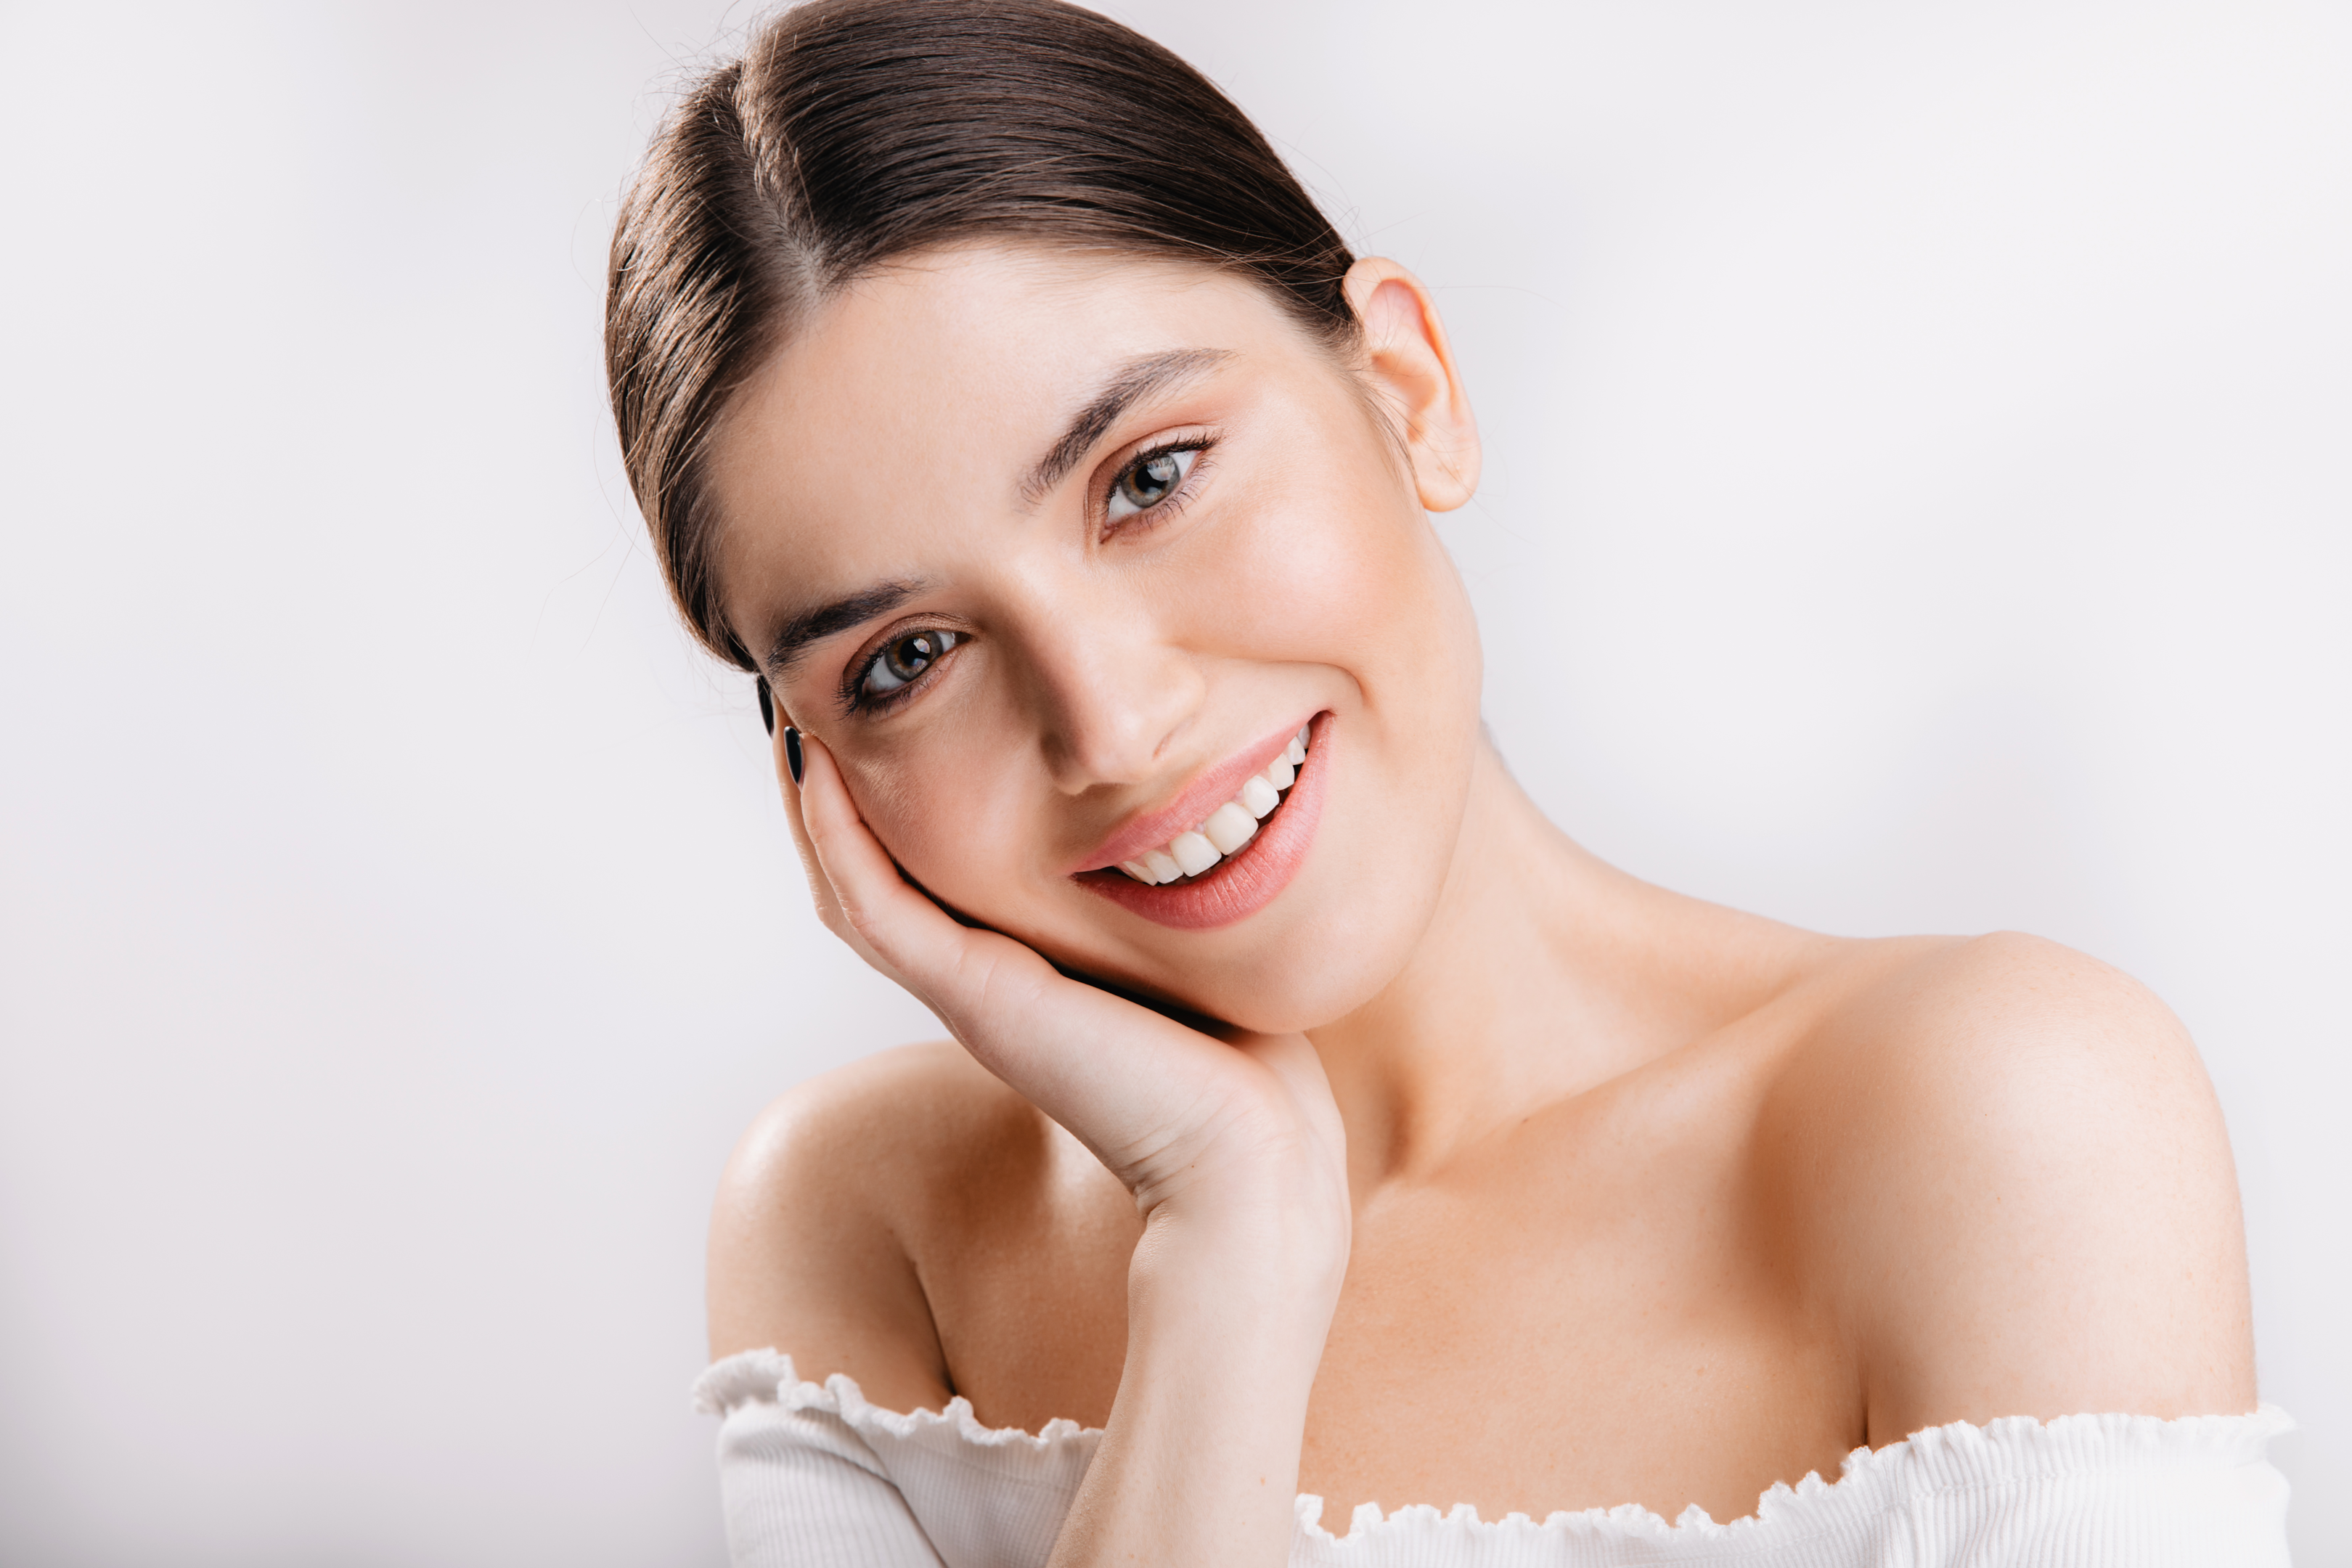 Healthy, shining, acne-free skin improves your confidence.